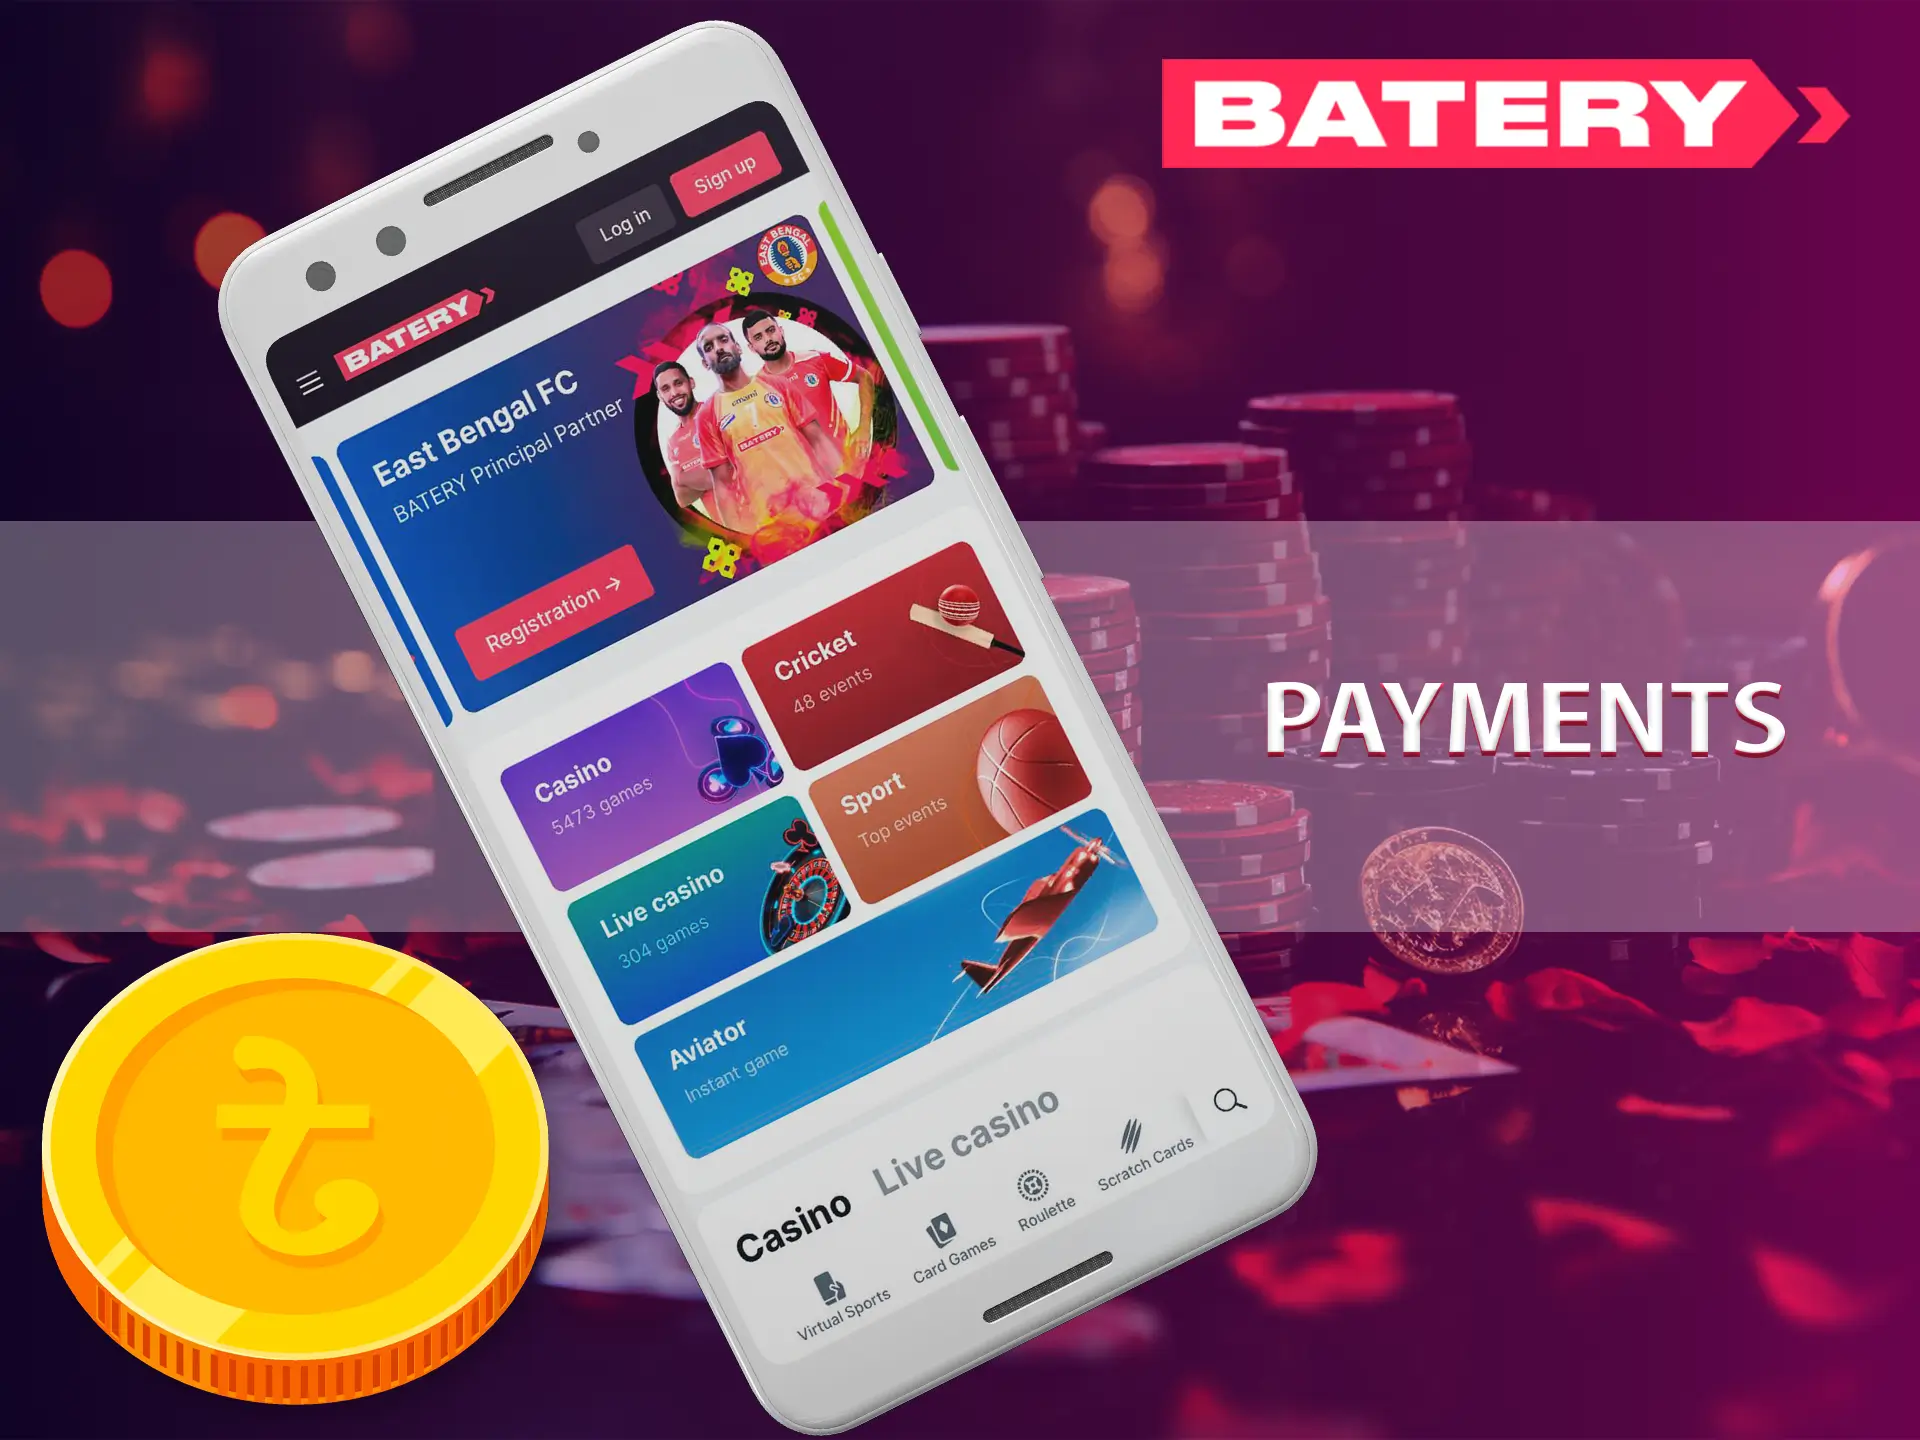 Use the available deposit and payment methods at Batery Casino.